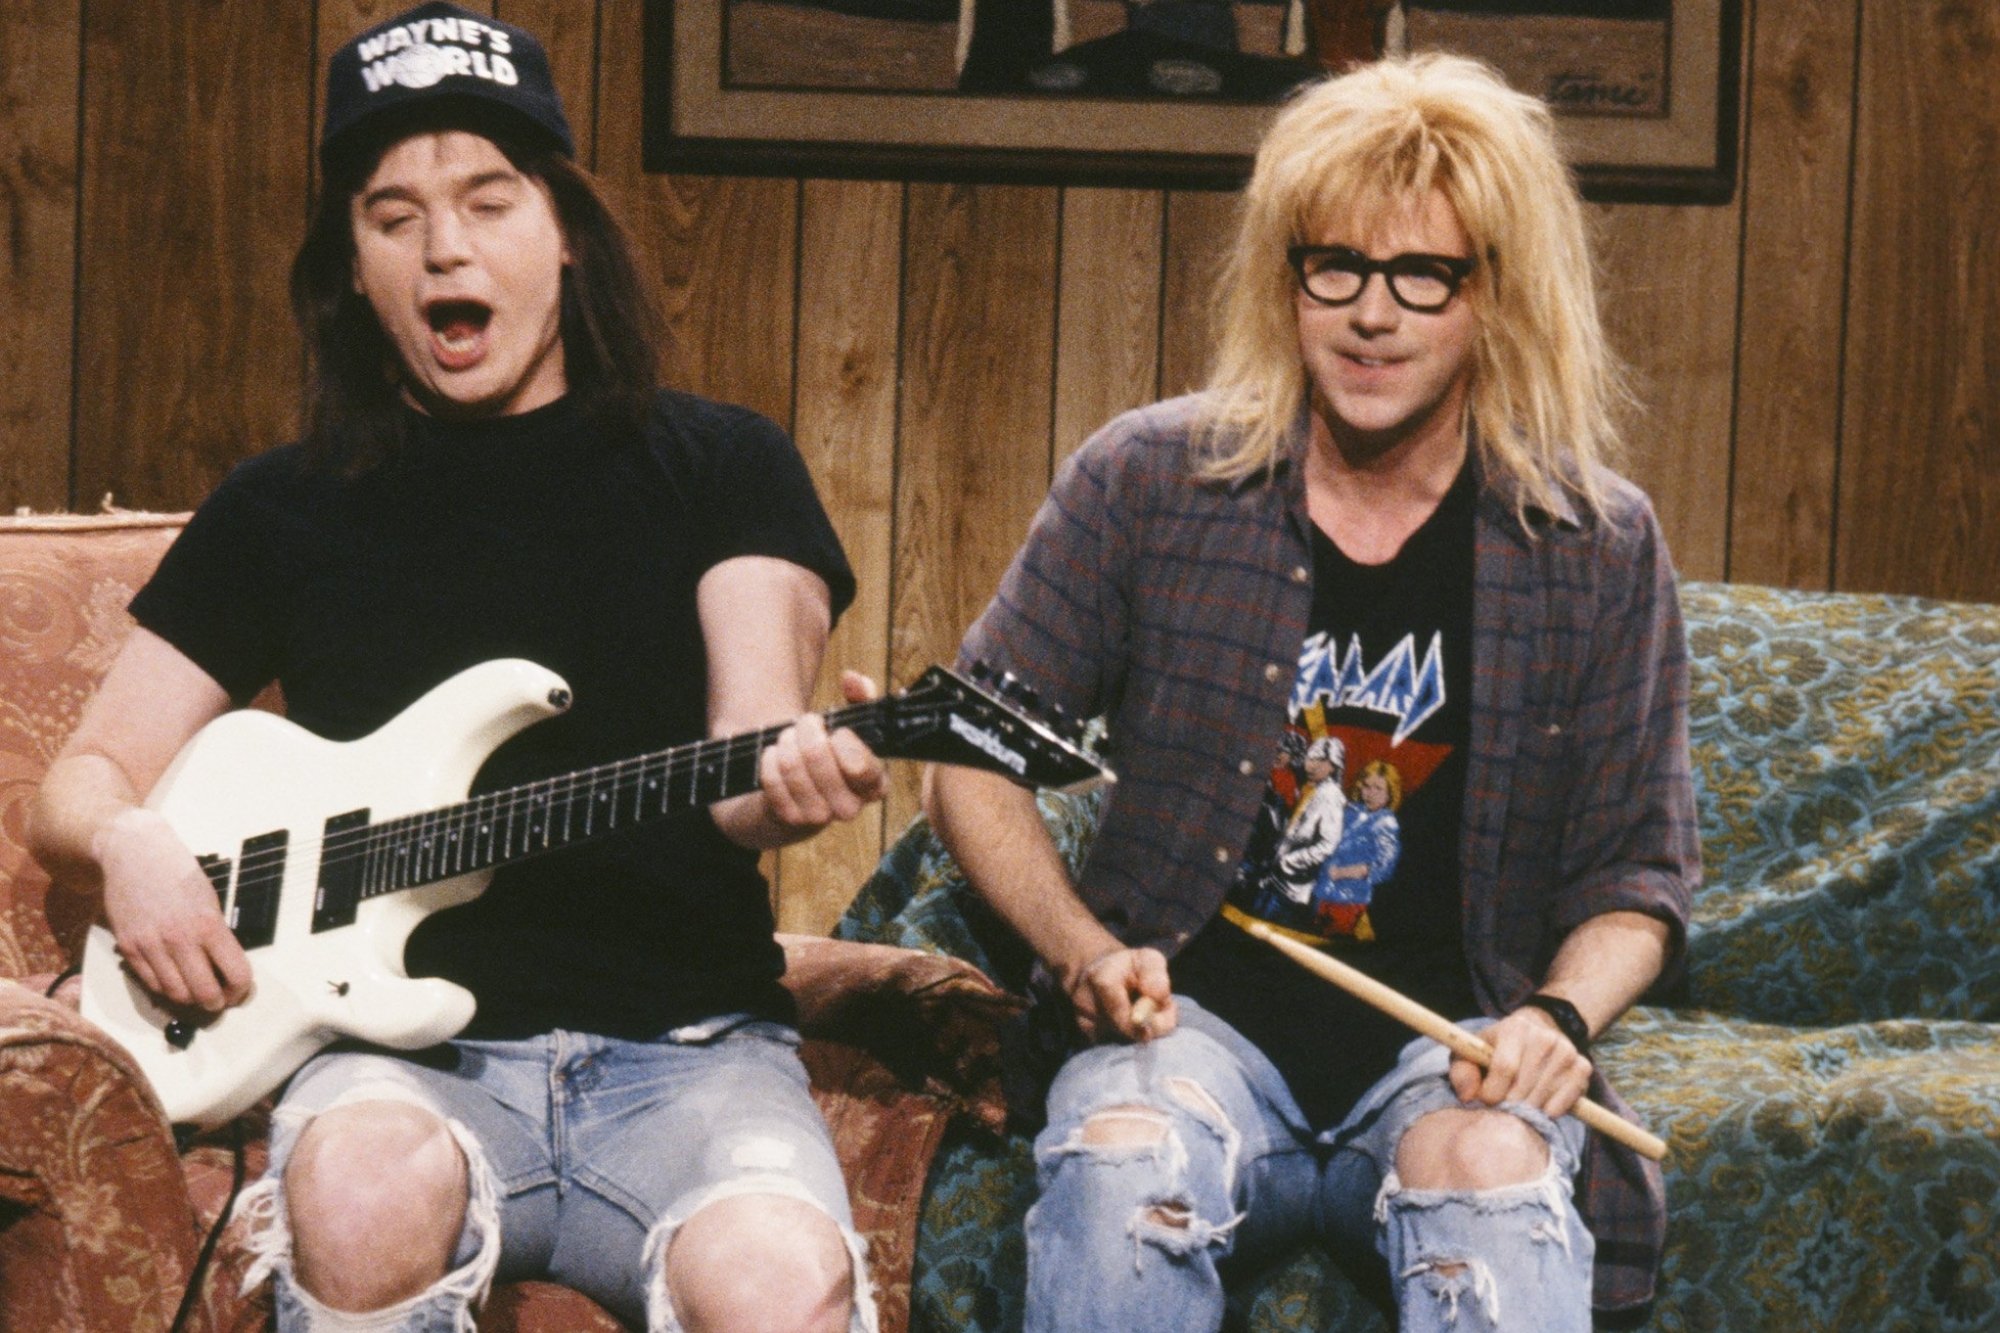 'Saturday Night Live' 'Wayne's World' Mike Myers as Wayne Campbell and Dana Carvey as Garth Algar. They're sitting on the couch with Myers holding a guitar and Carvey holding drumsticks.